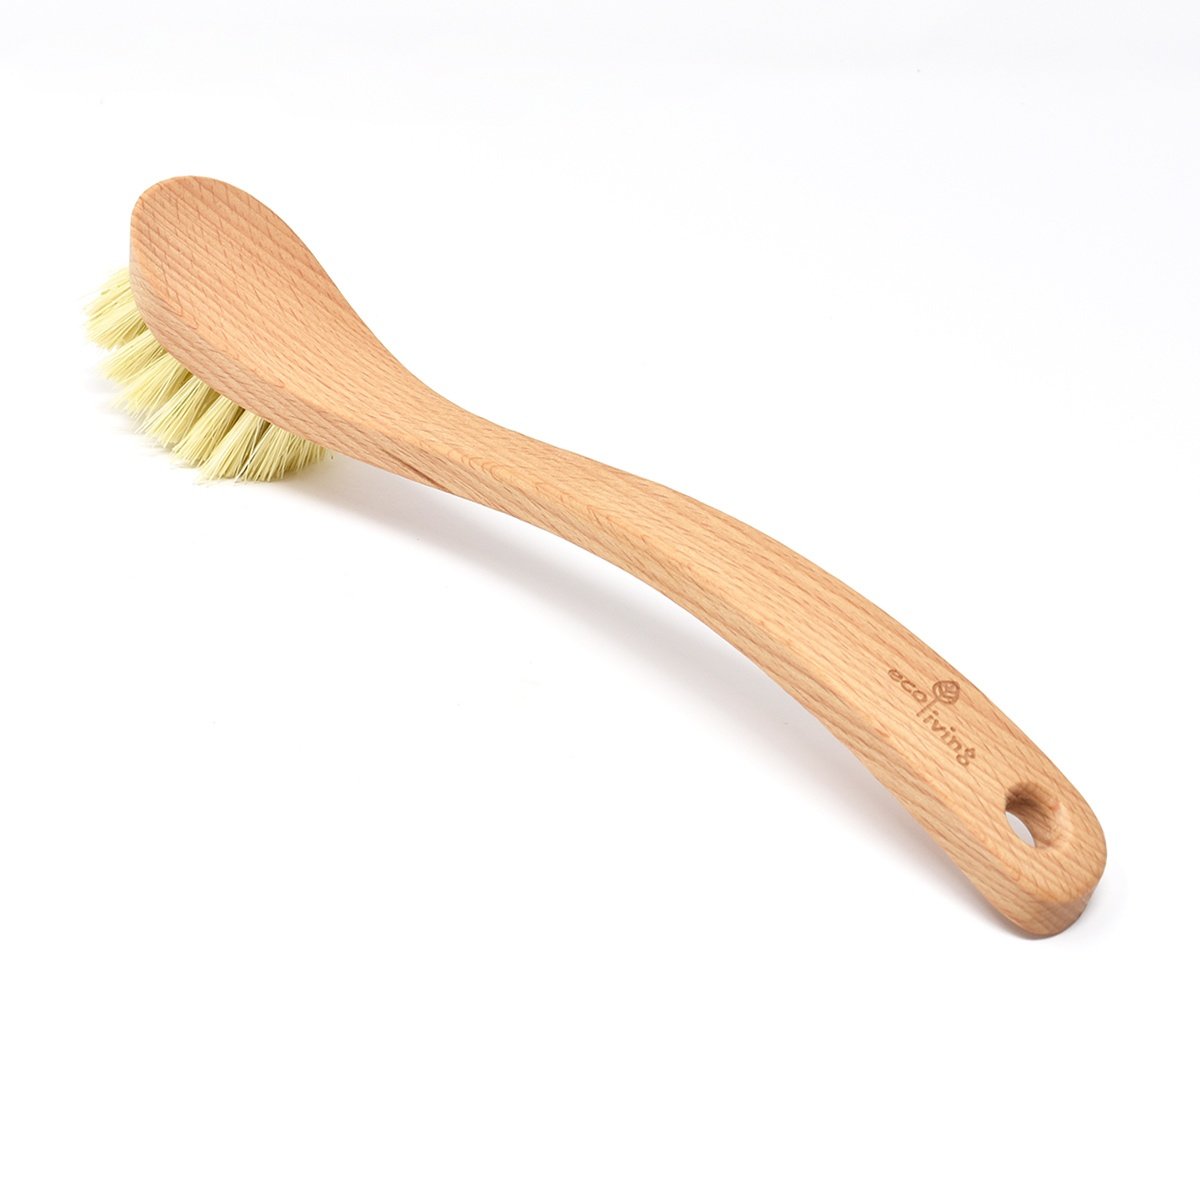 https://www.peacewiththewild.co.uk/wp-content/uploads/2019/10/wooden-dish-brush-plant-bristles-eco-living.jpg